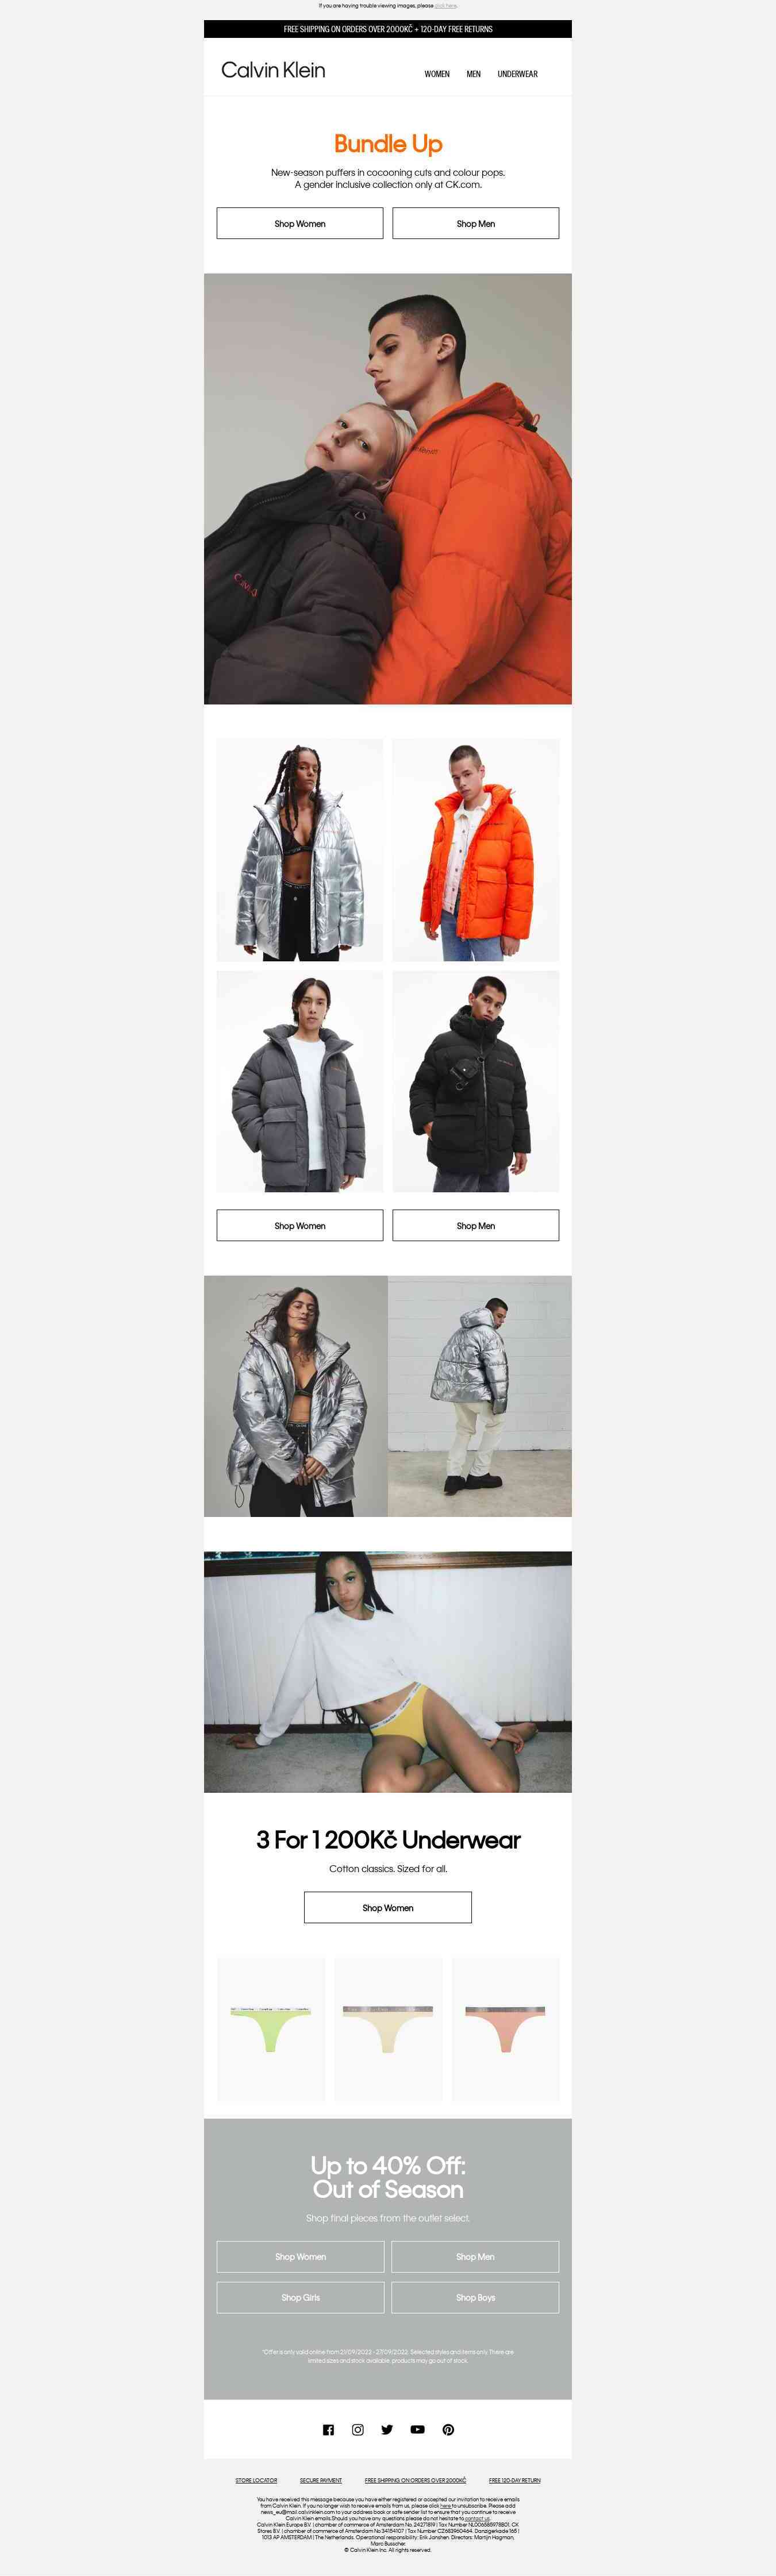 The New Puffers Are Here